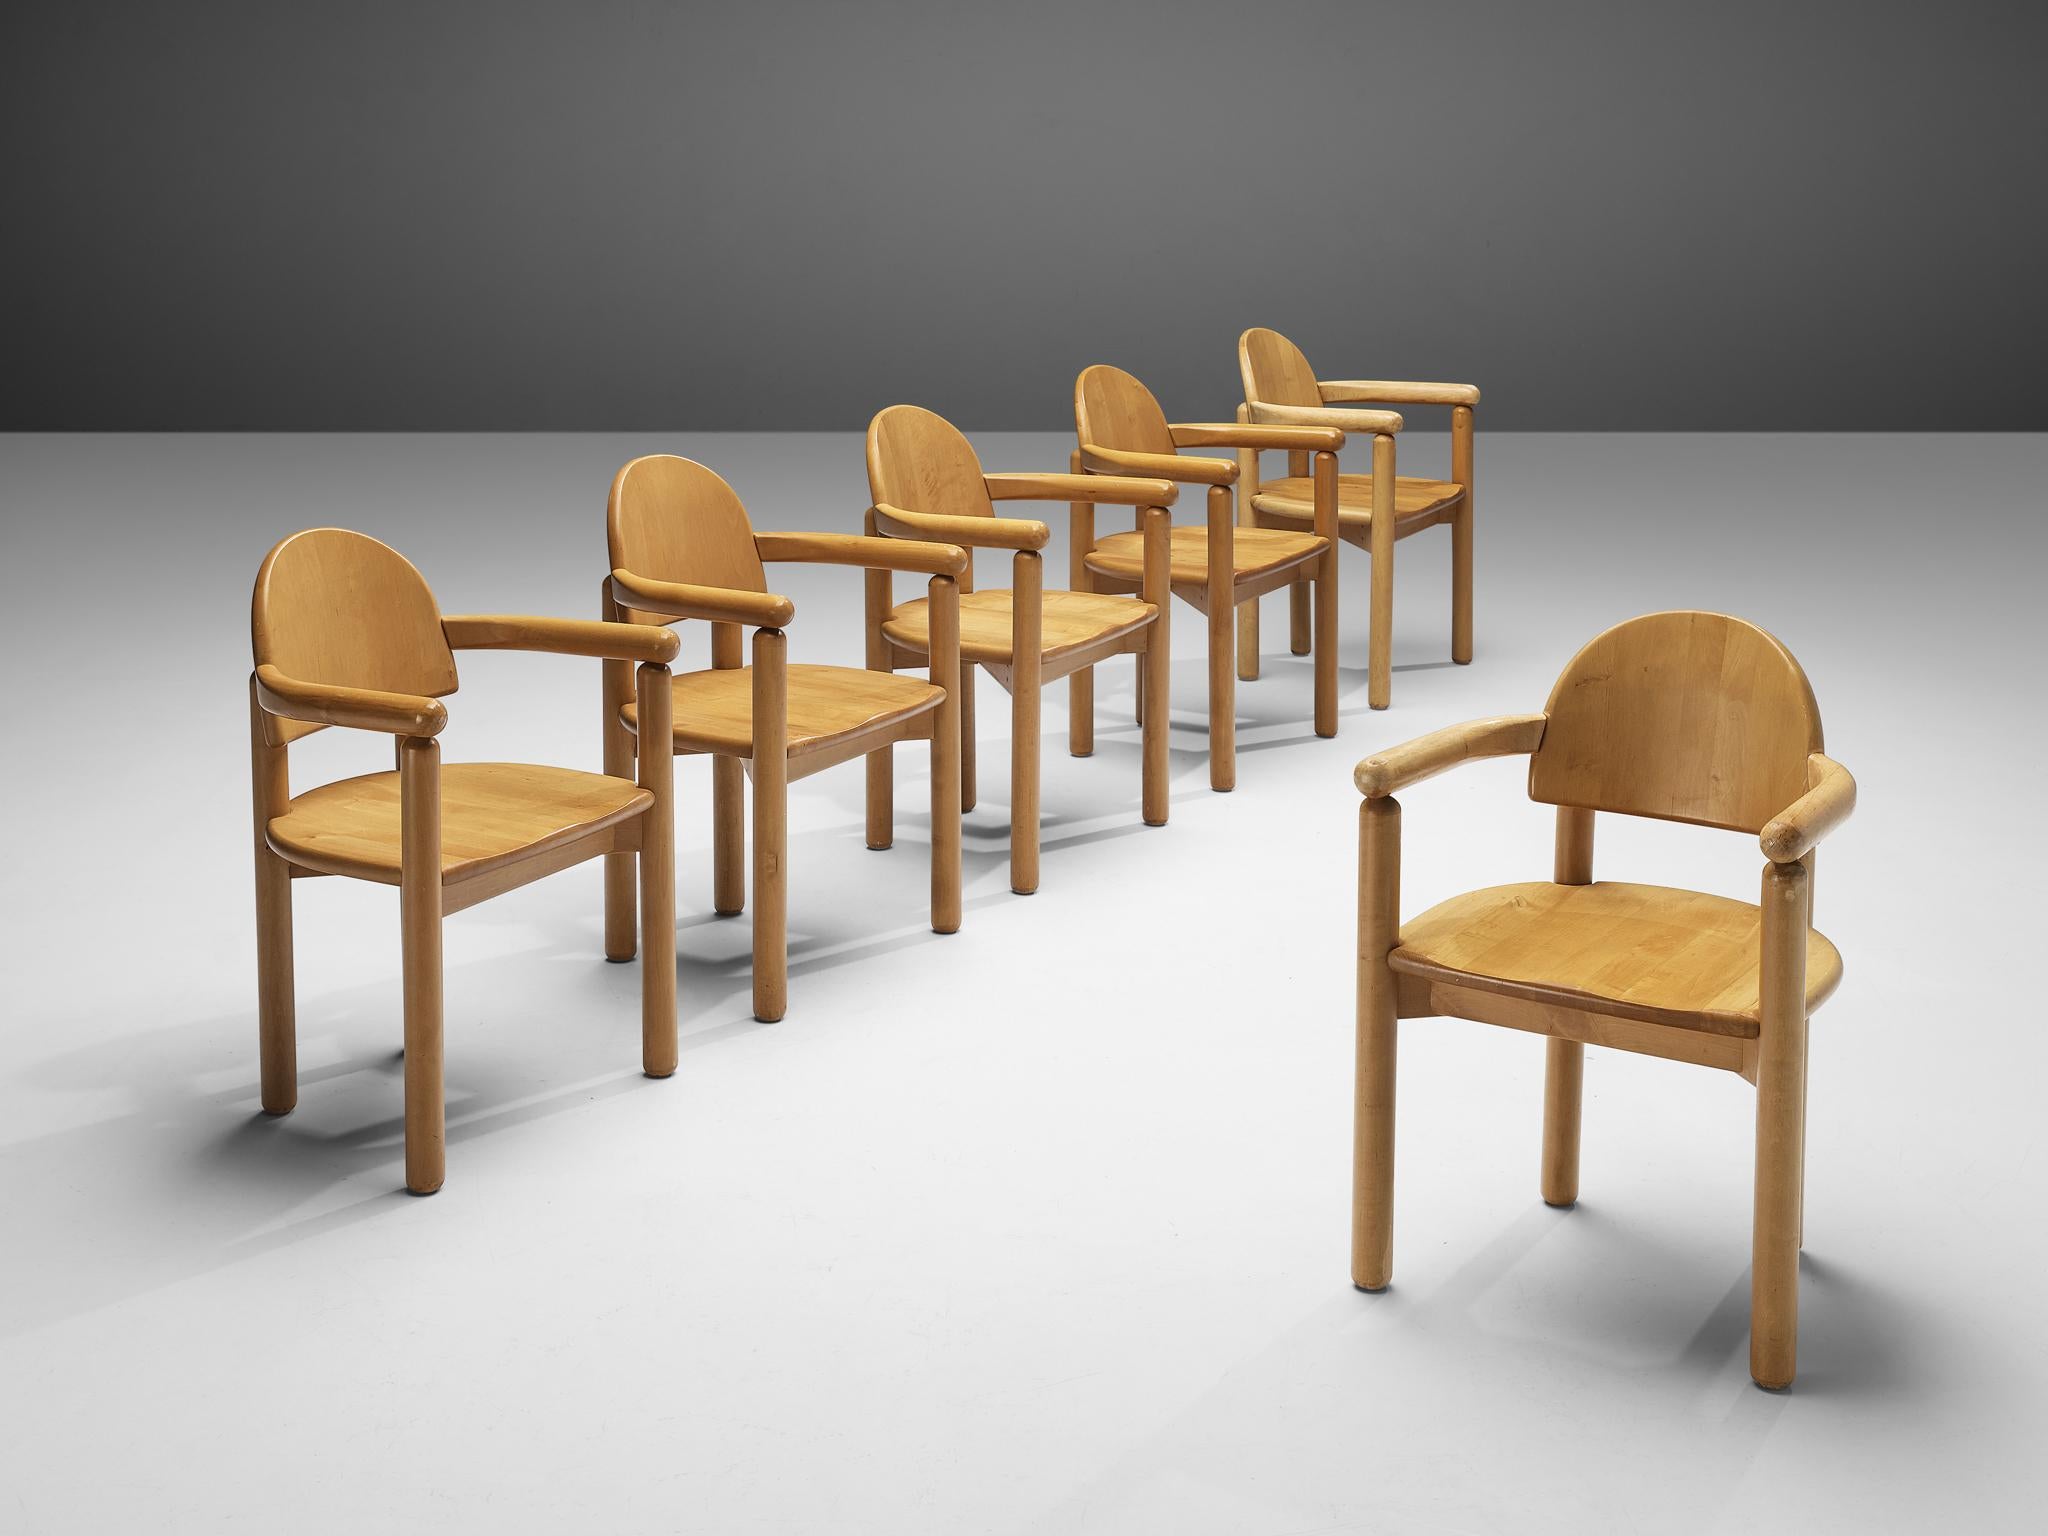 Rainer Daumiller for Hirtshals Savvaerk, set of six armchairs, birch, Denmark, 1970s
 
These dining chairs by Danish designer Rainer Daumiller have multiple features. The grain of the warm birch wood contributes to the natural expressiveness of the